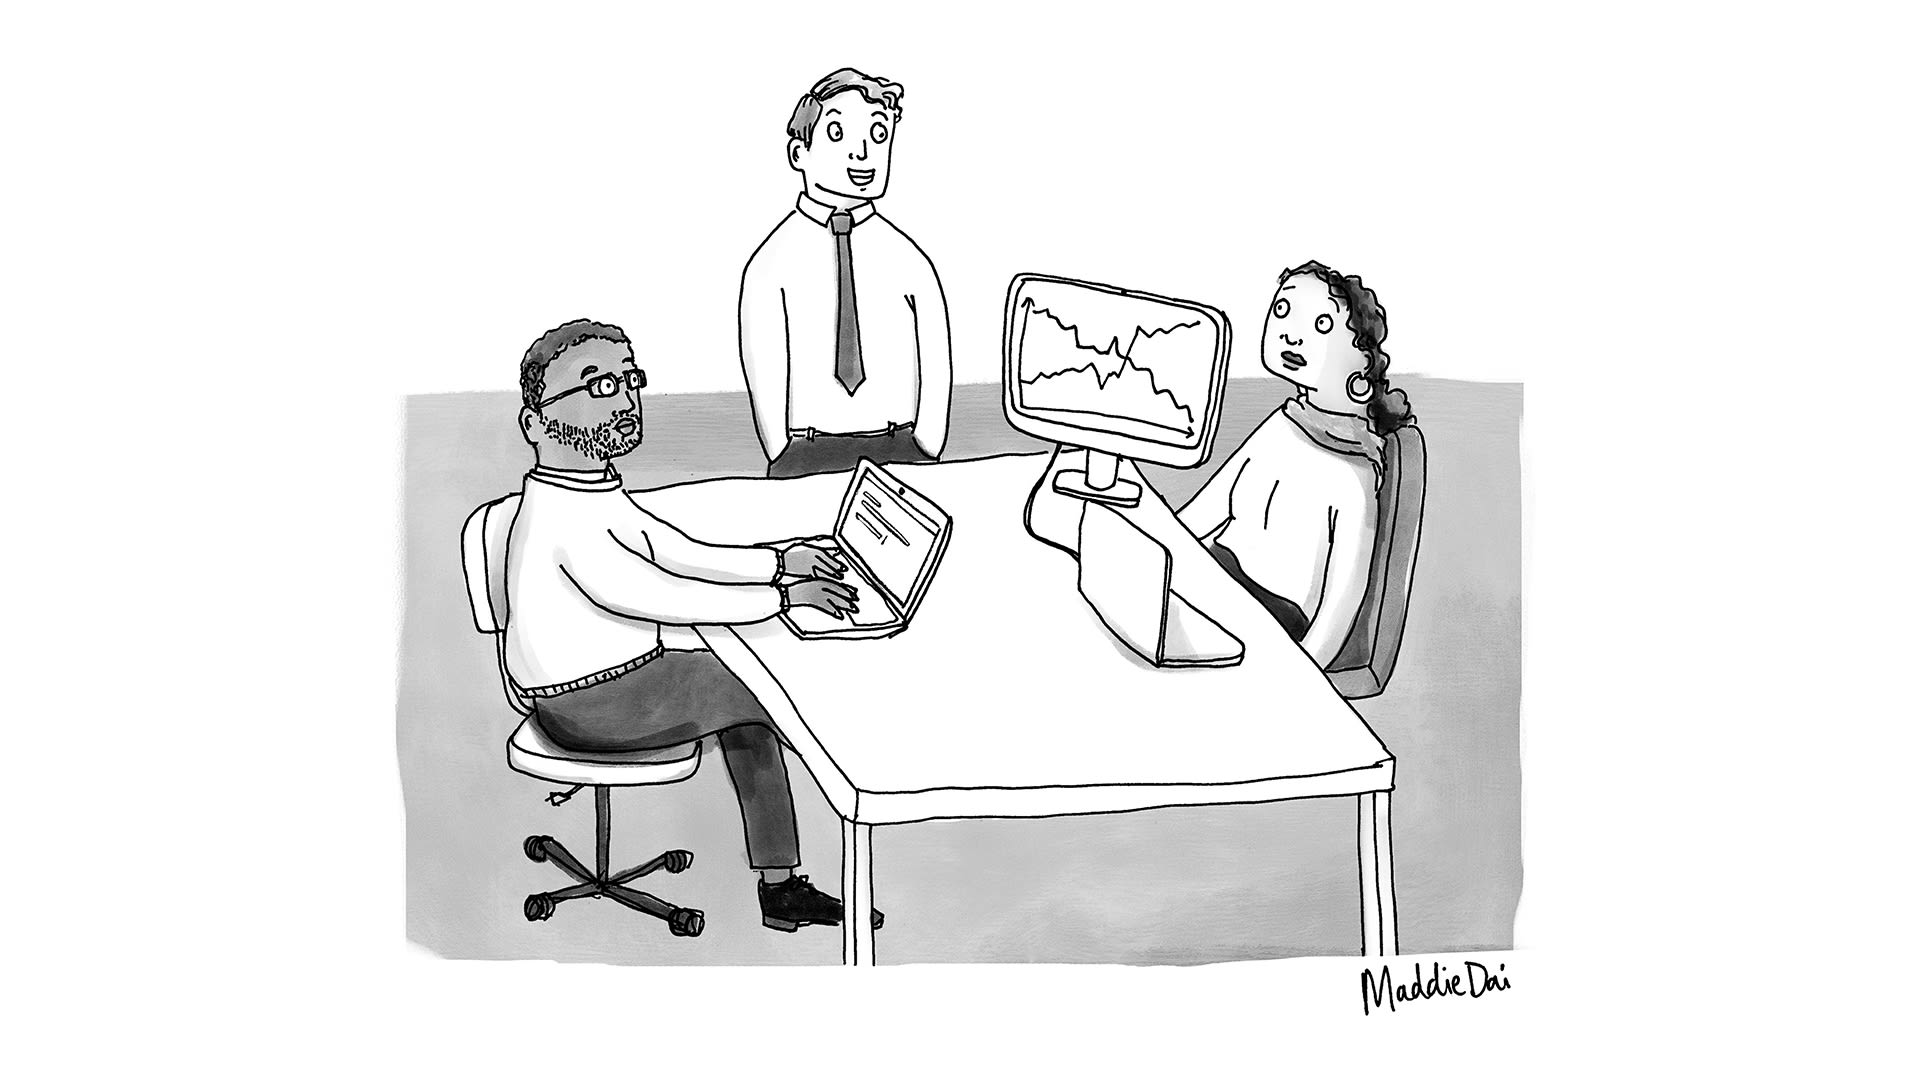 Watch Turning Bosses and Co-workers Into Cartoons | The New Yorker